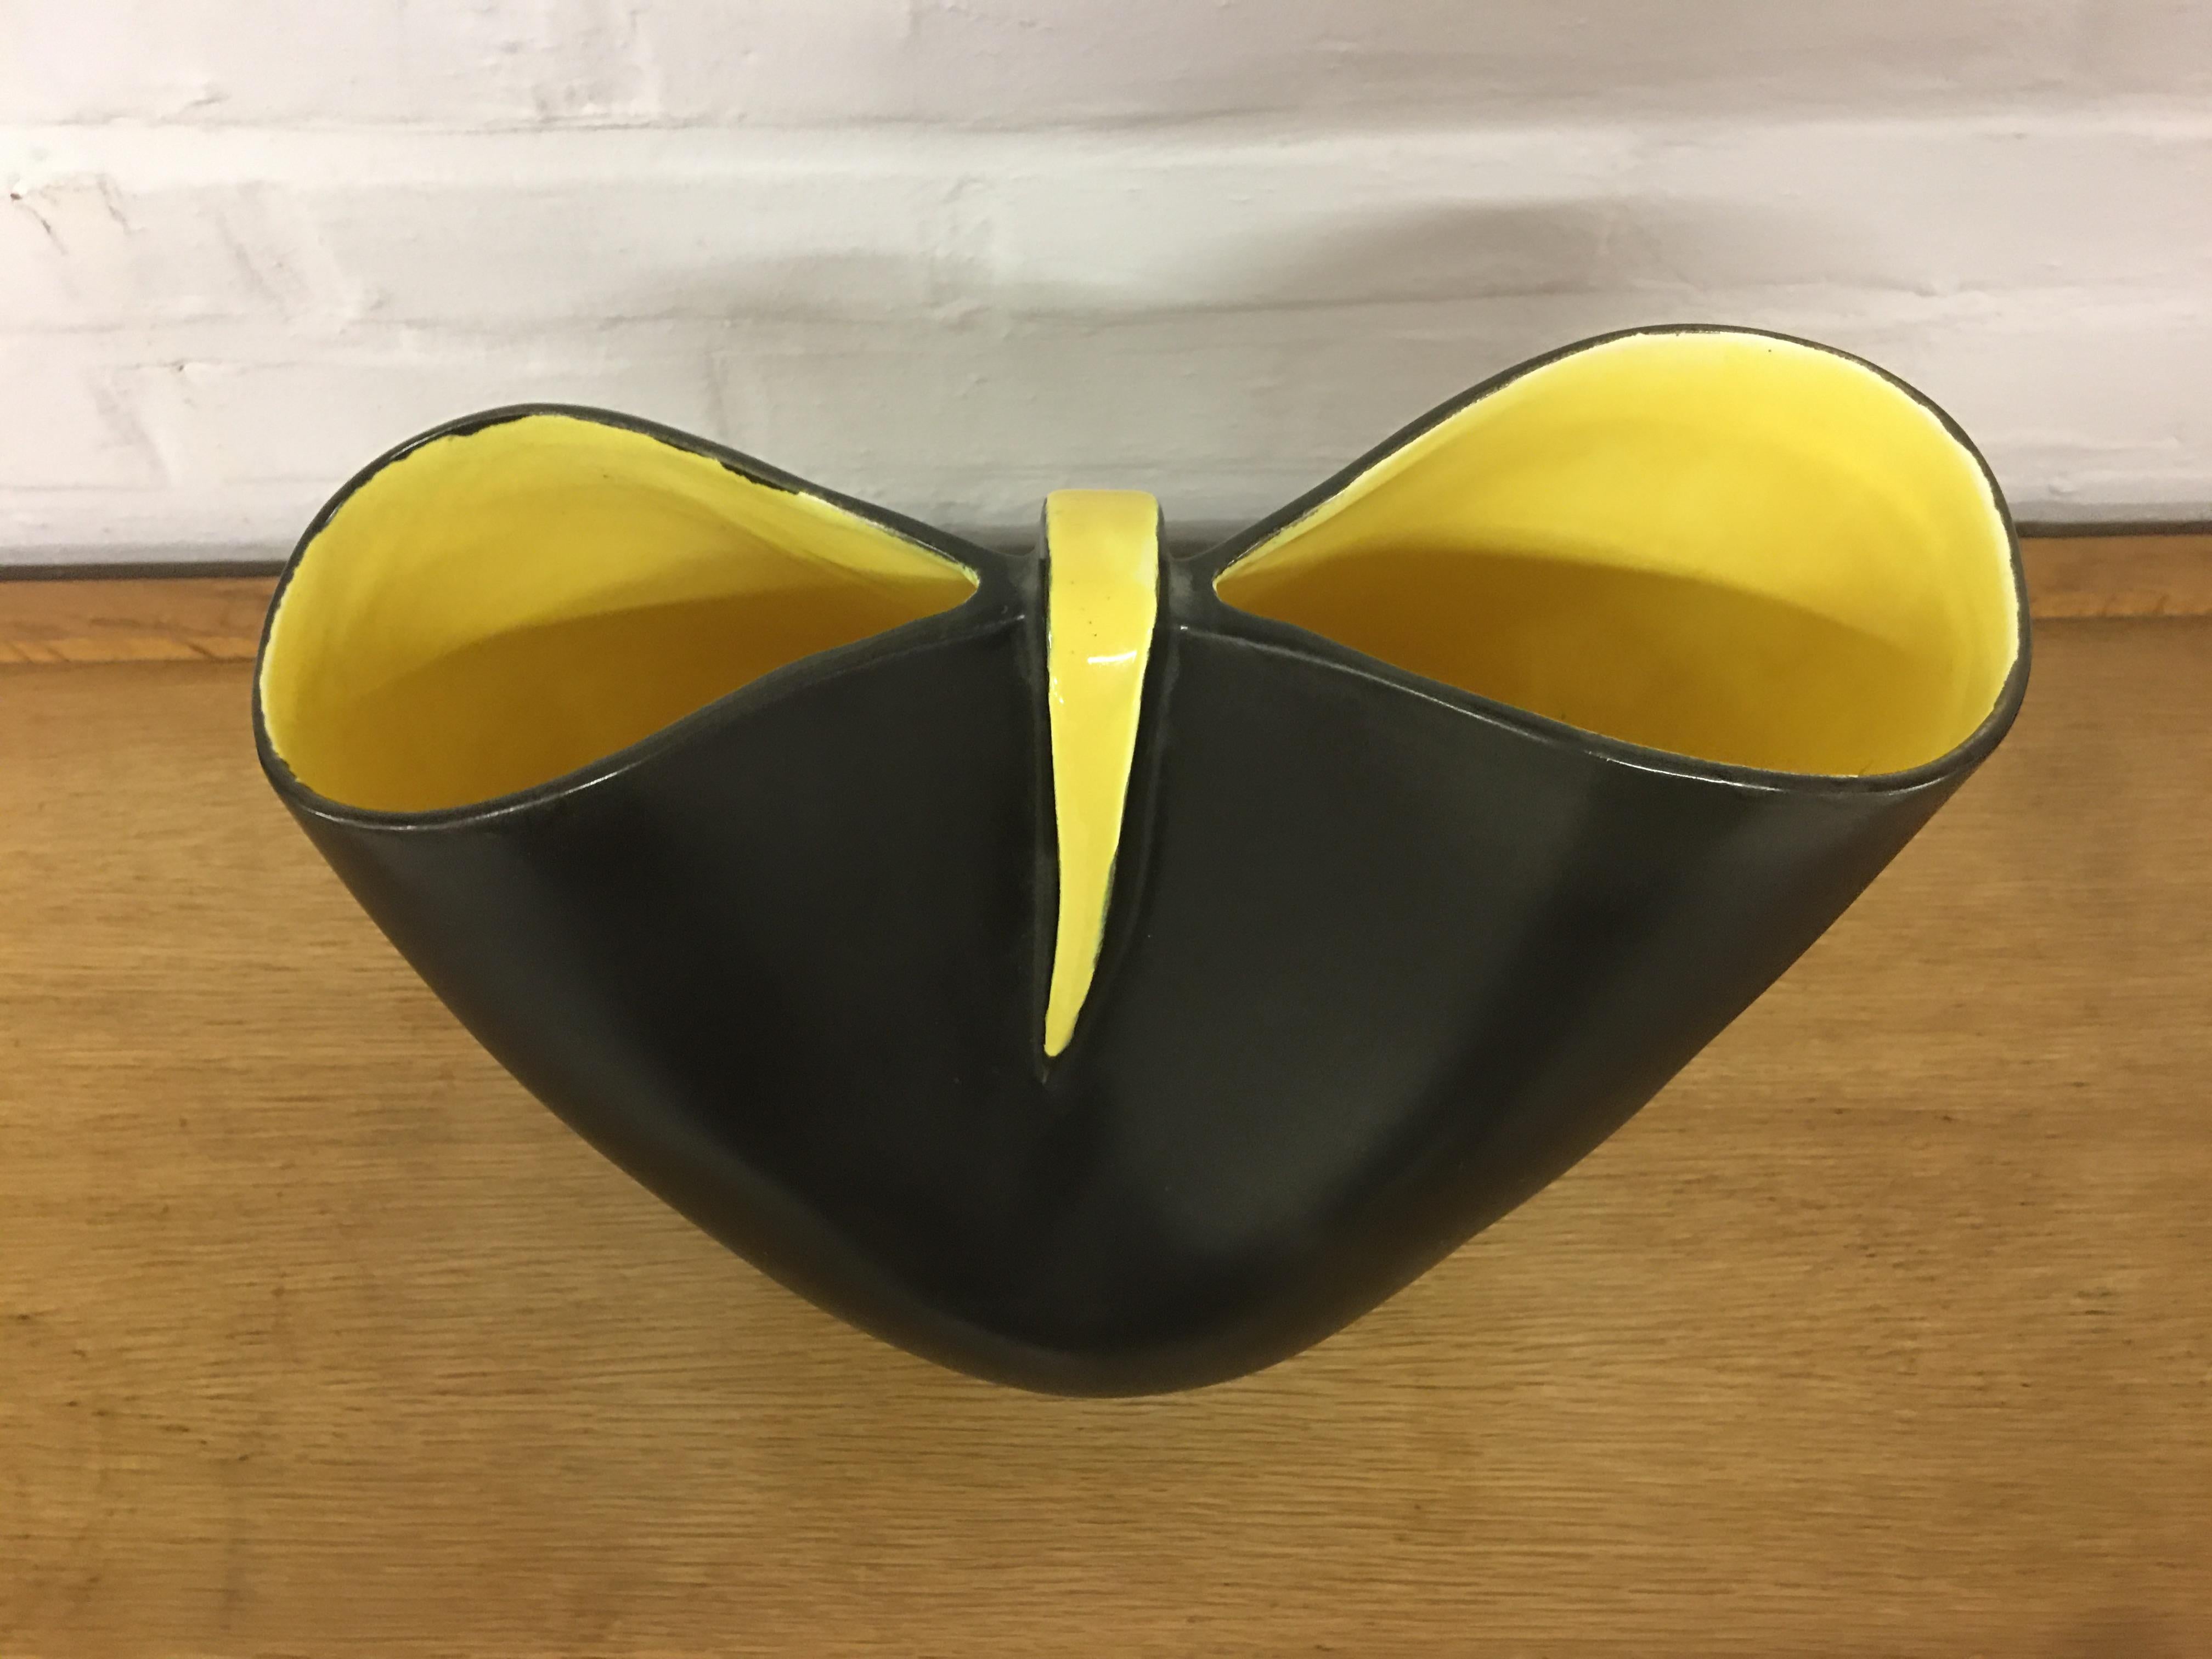 Atelier Revernay Midcentury Biomorphic Vase , circa 1950 In Good Condition For Sale In Saint-Ouen, FR